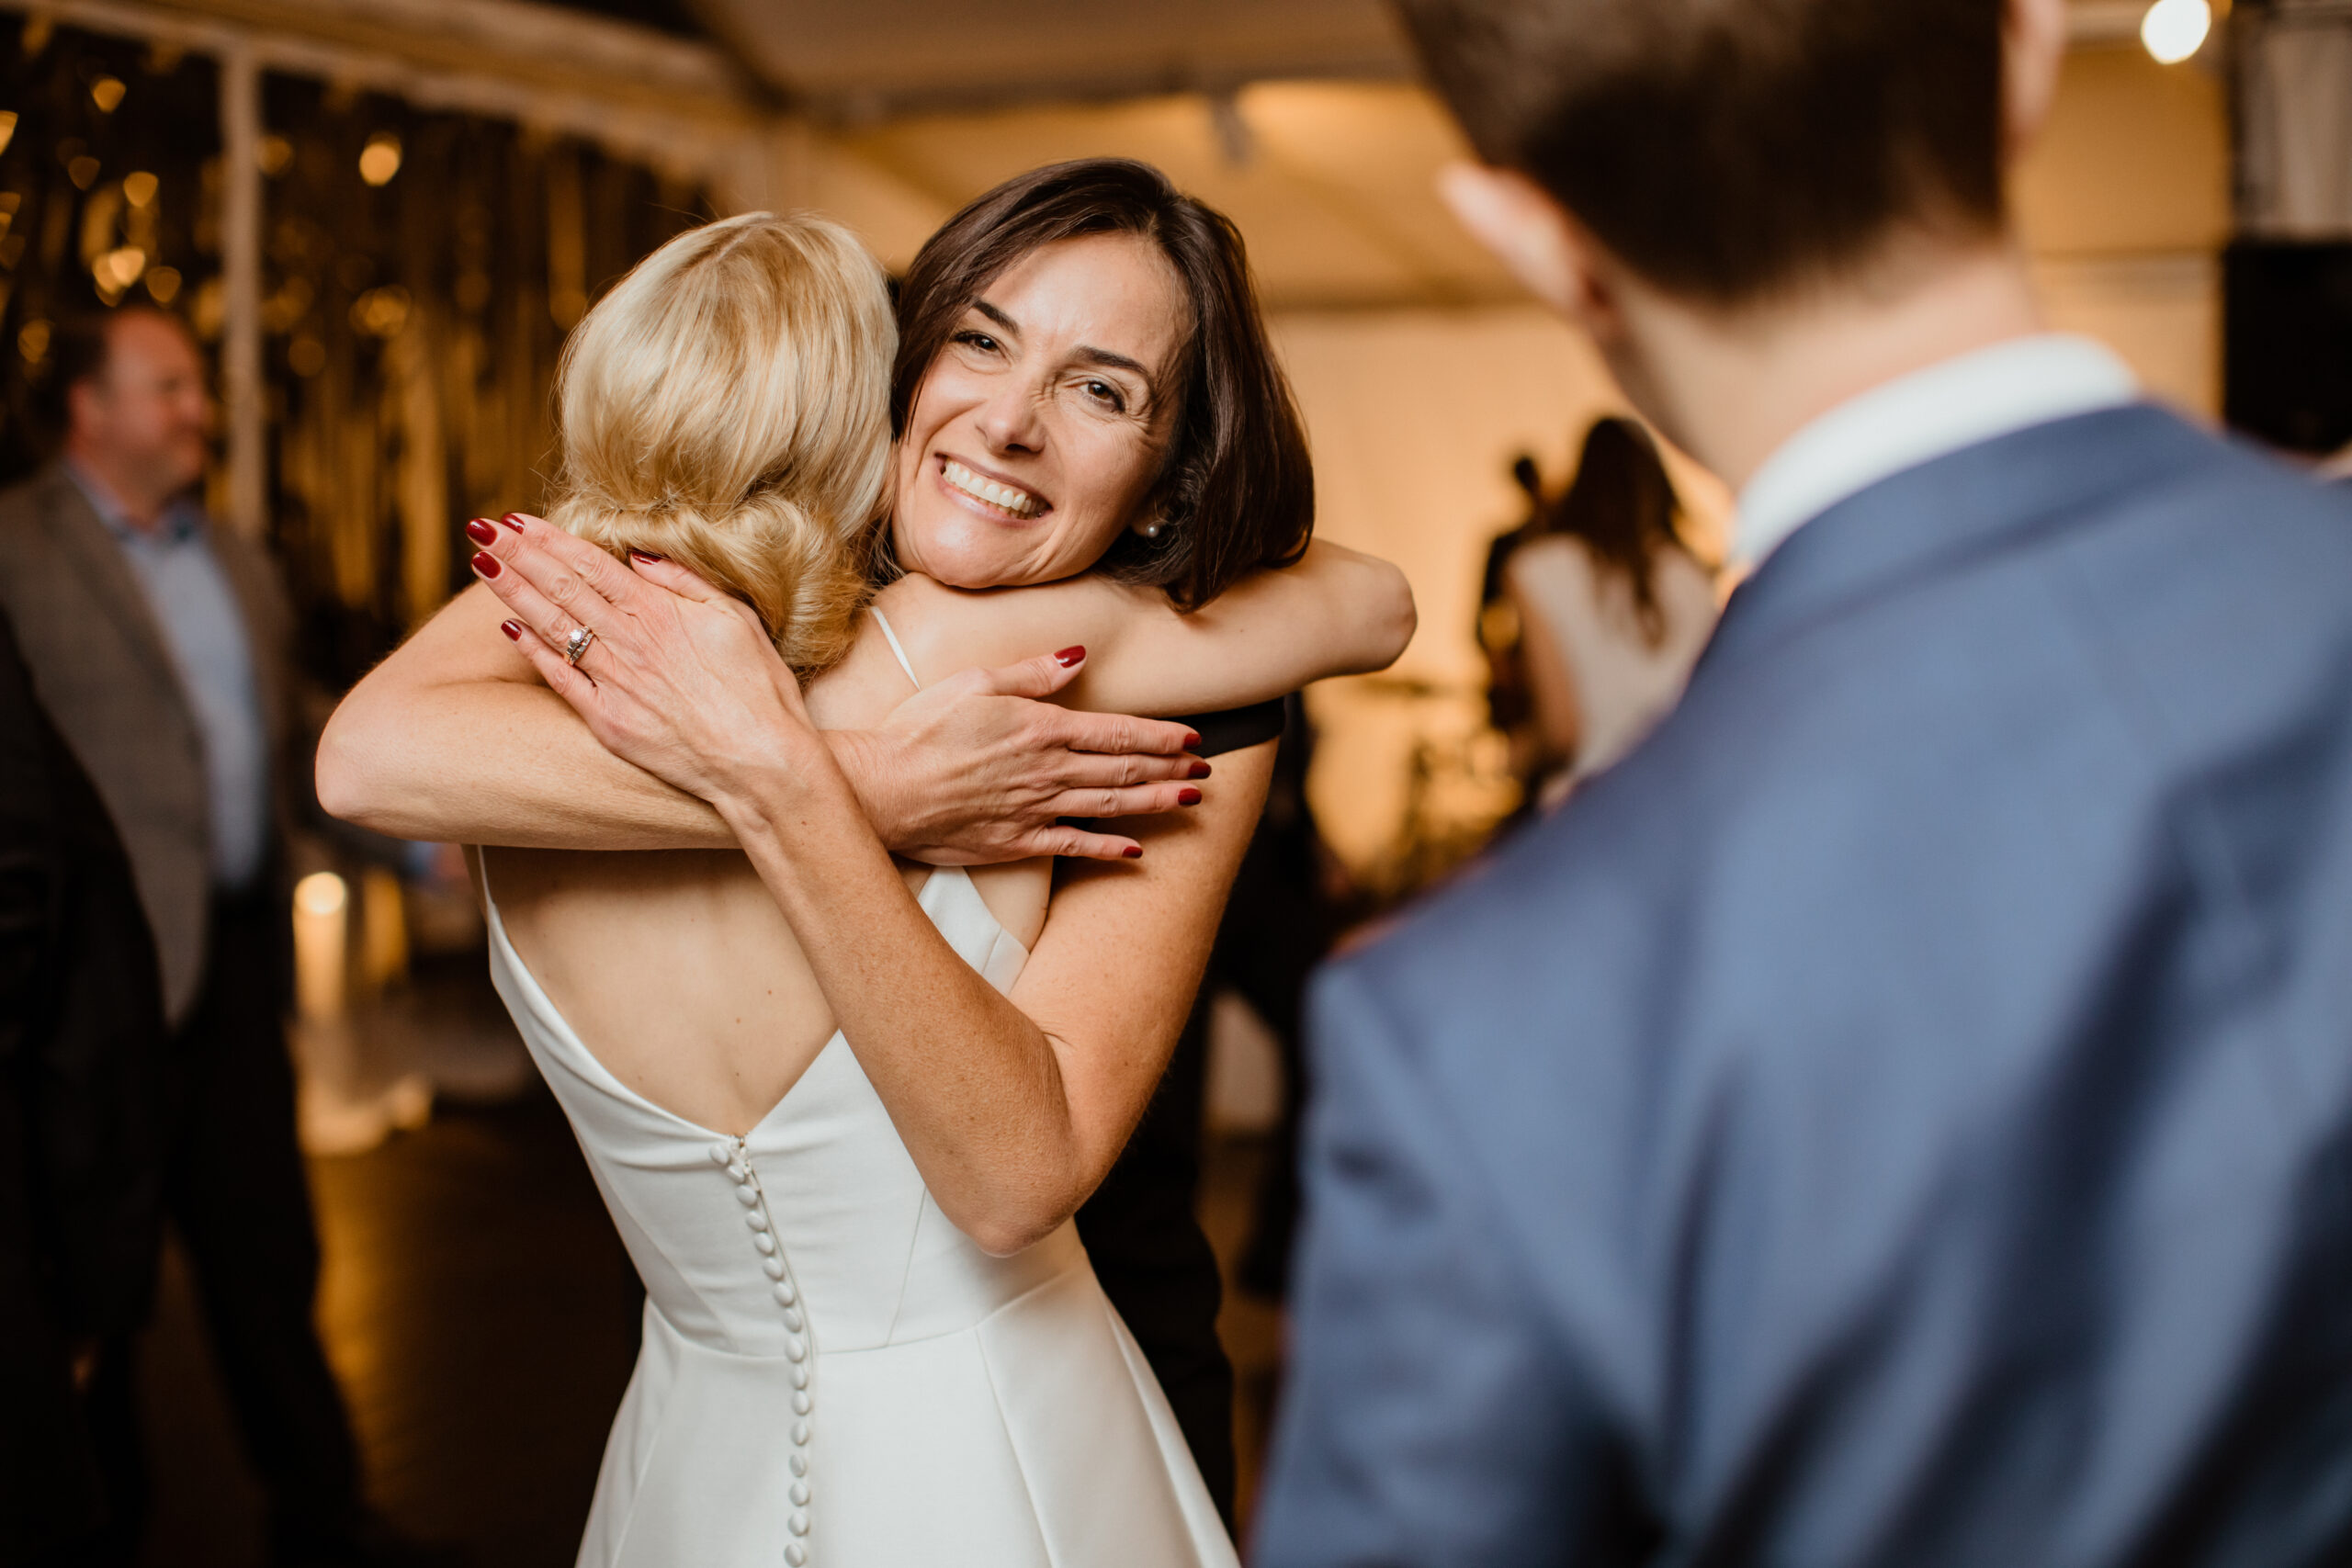 Stunning bride embraces a friend on her dreamy New York wedding day